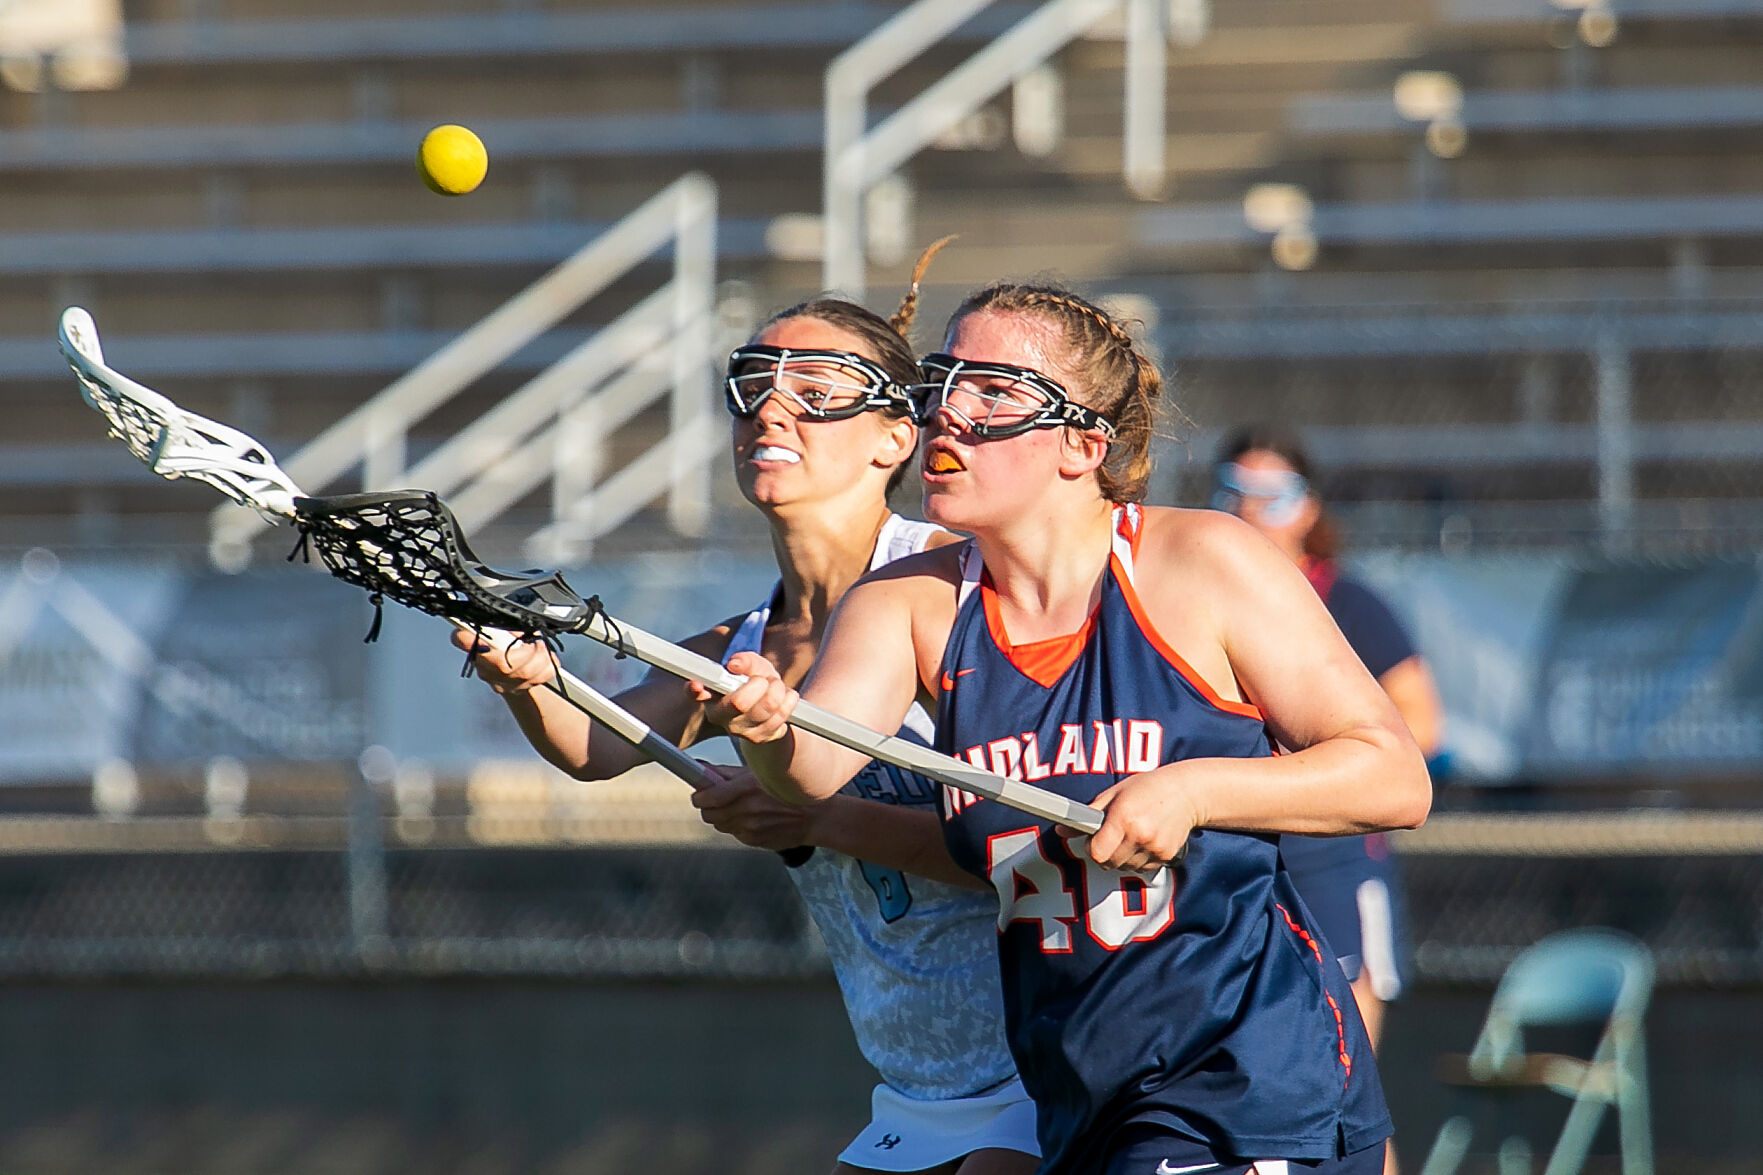 Traverse City United girls lacrosse team suffers close 8-7 defeat to Midland Dow in home opener